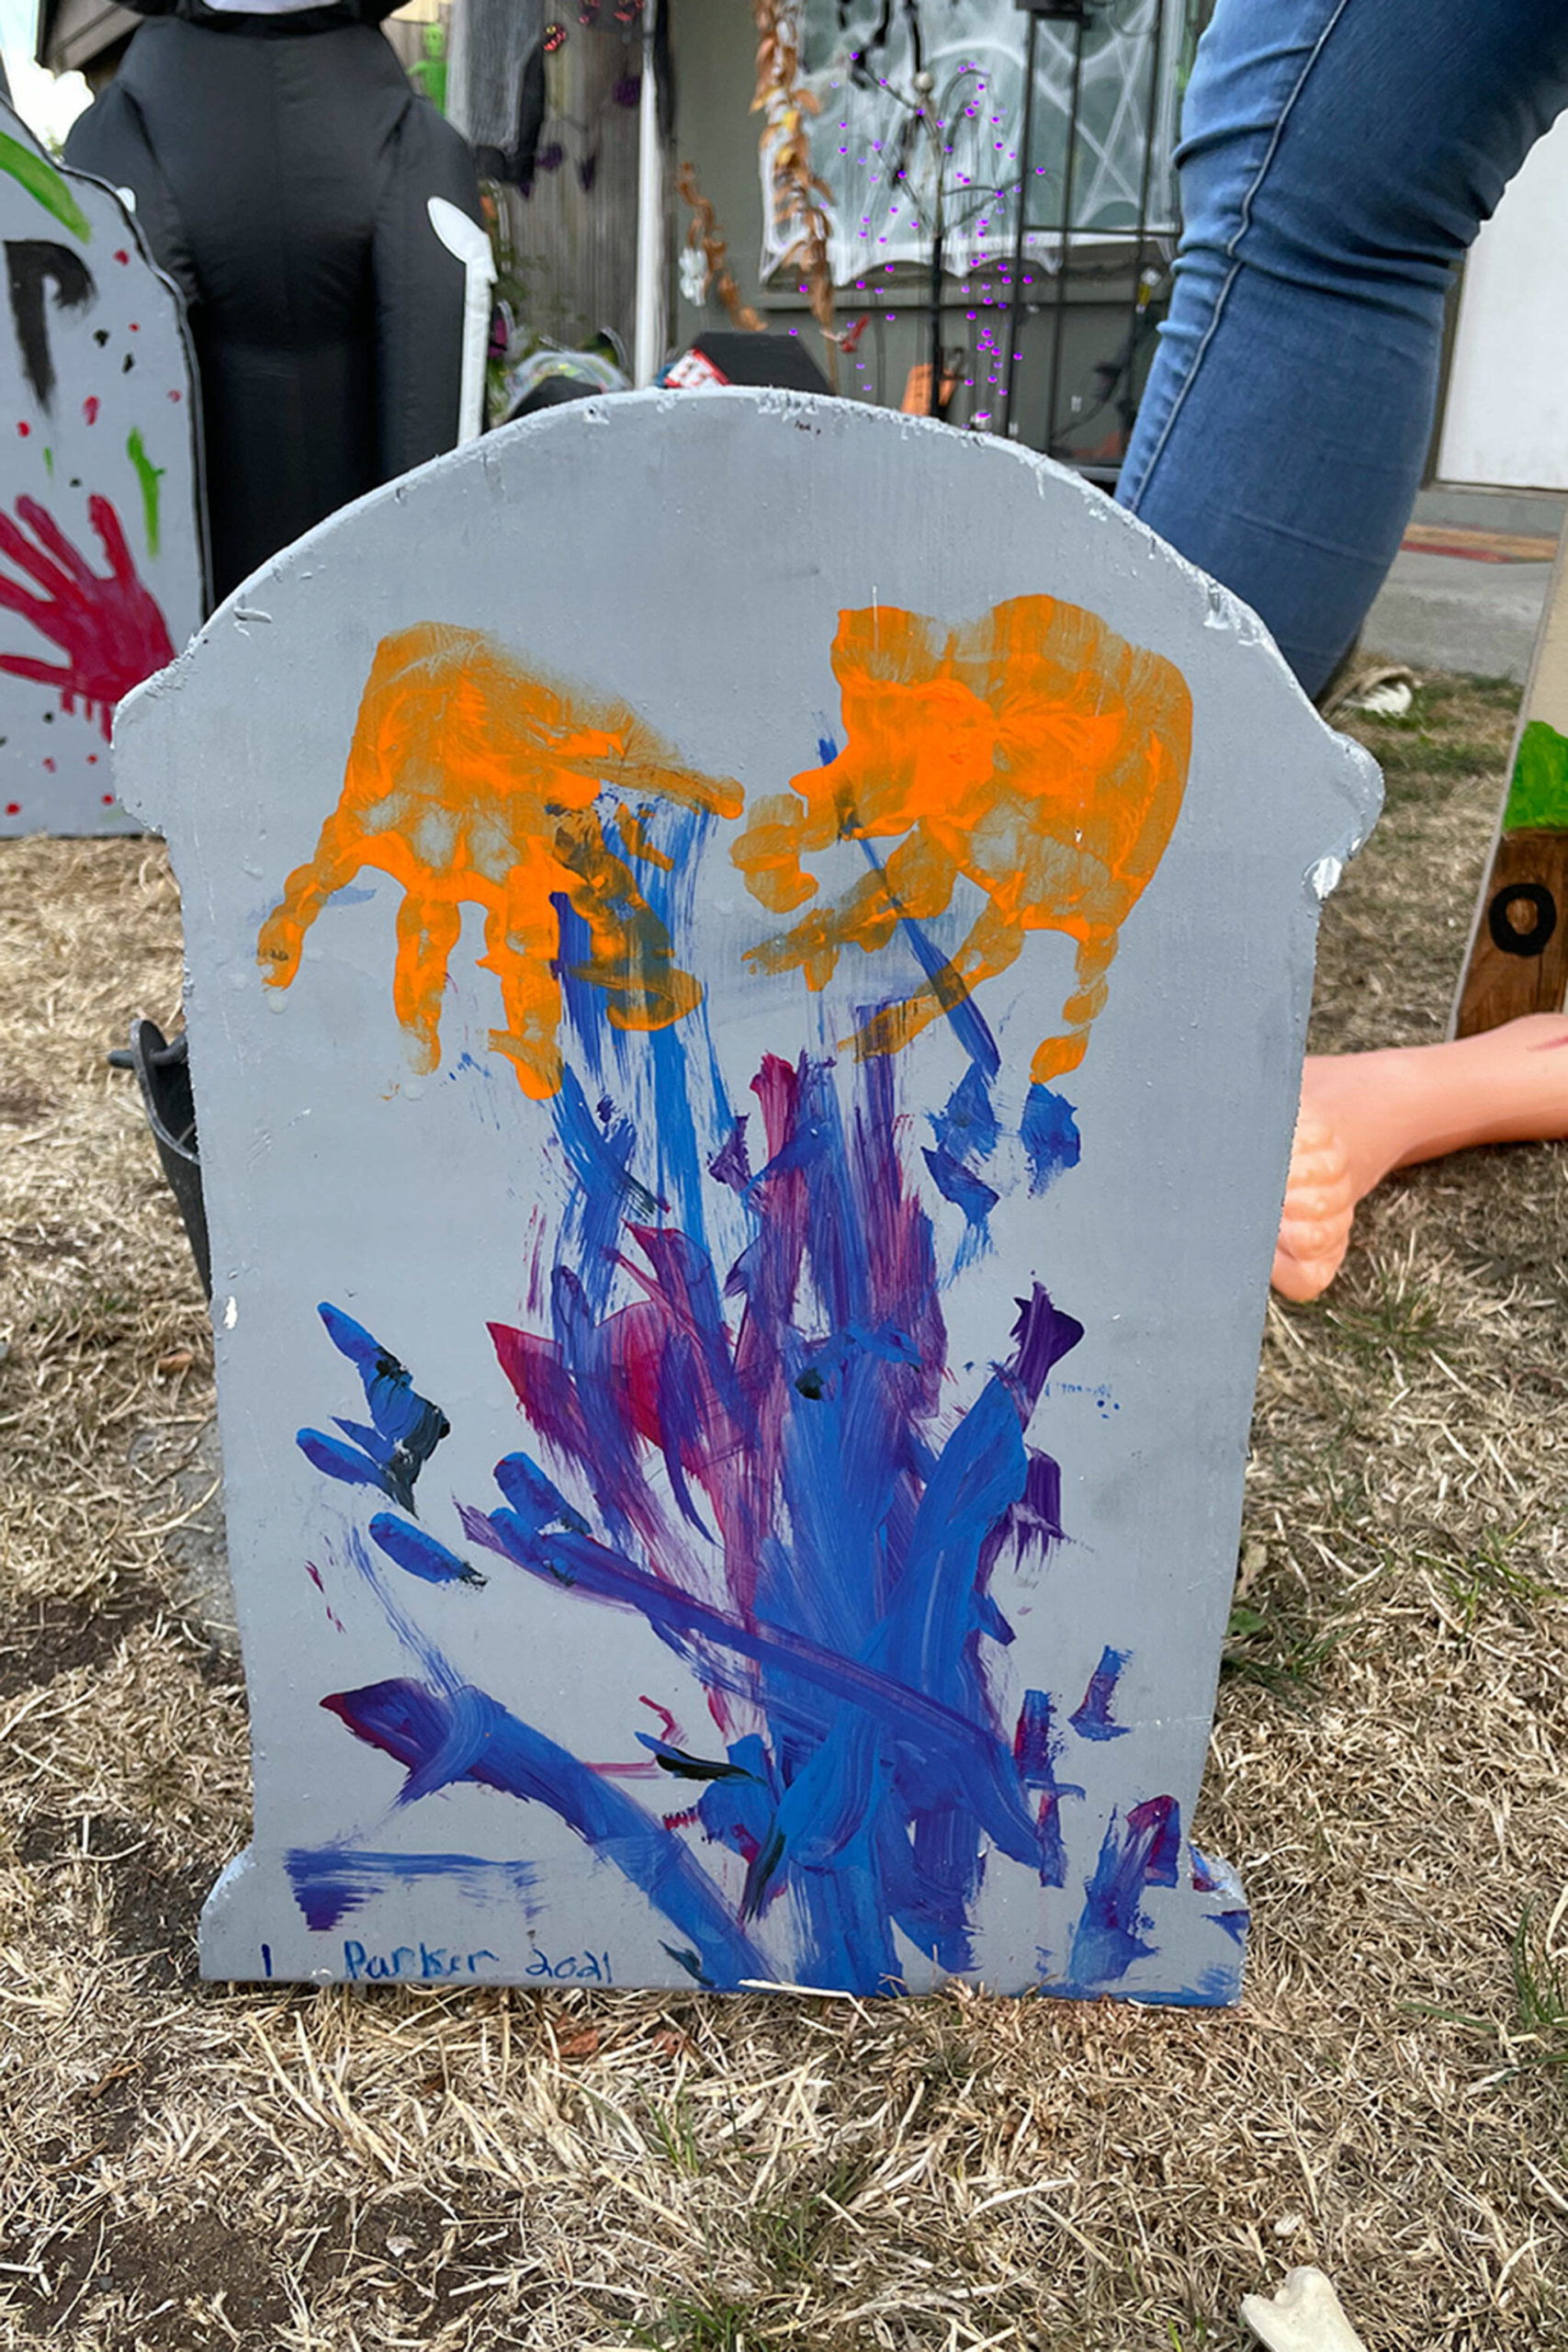 Sequim Gazette photo by Matthew Nash/ Each year, the Lomker/Kester family decorates new gravestones for their yard. This was the first made by daughter Parker Lomker.